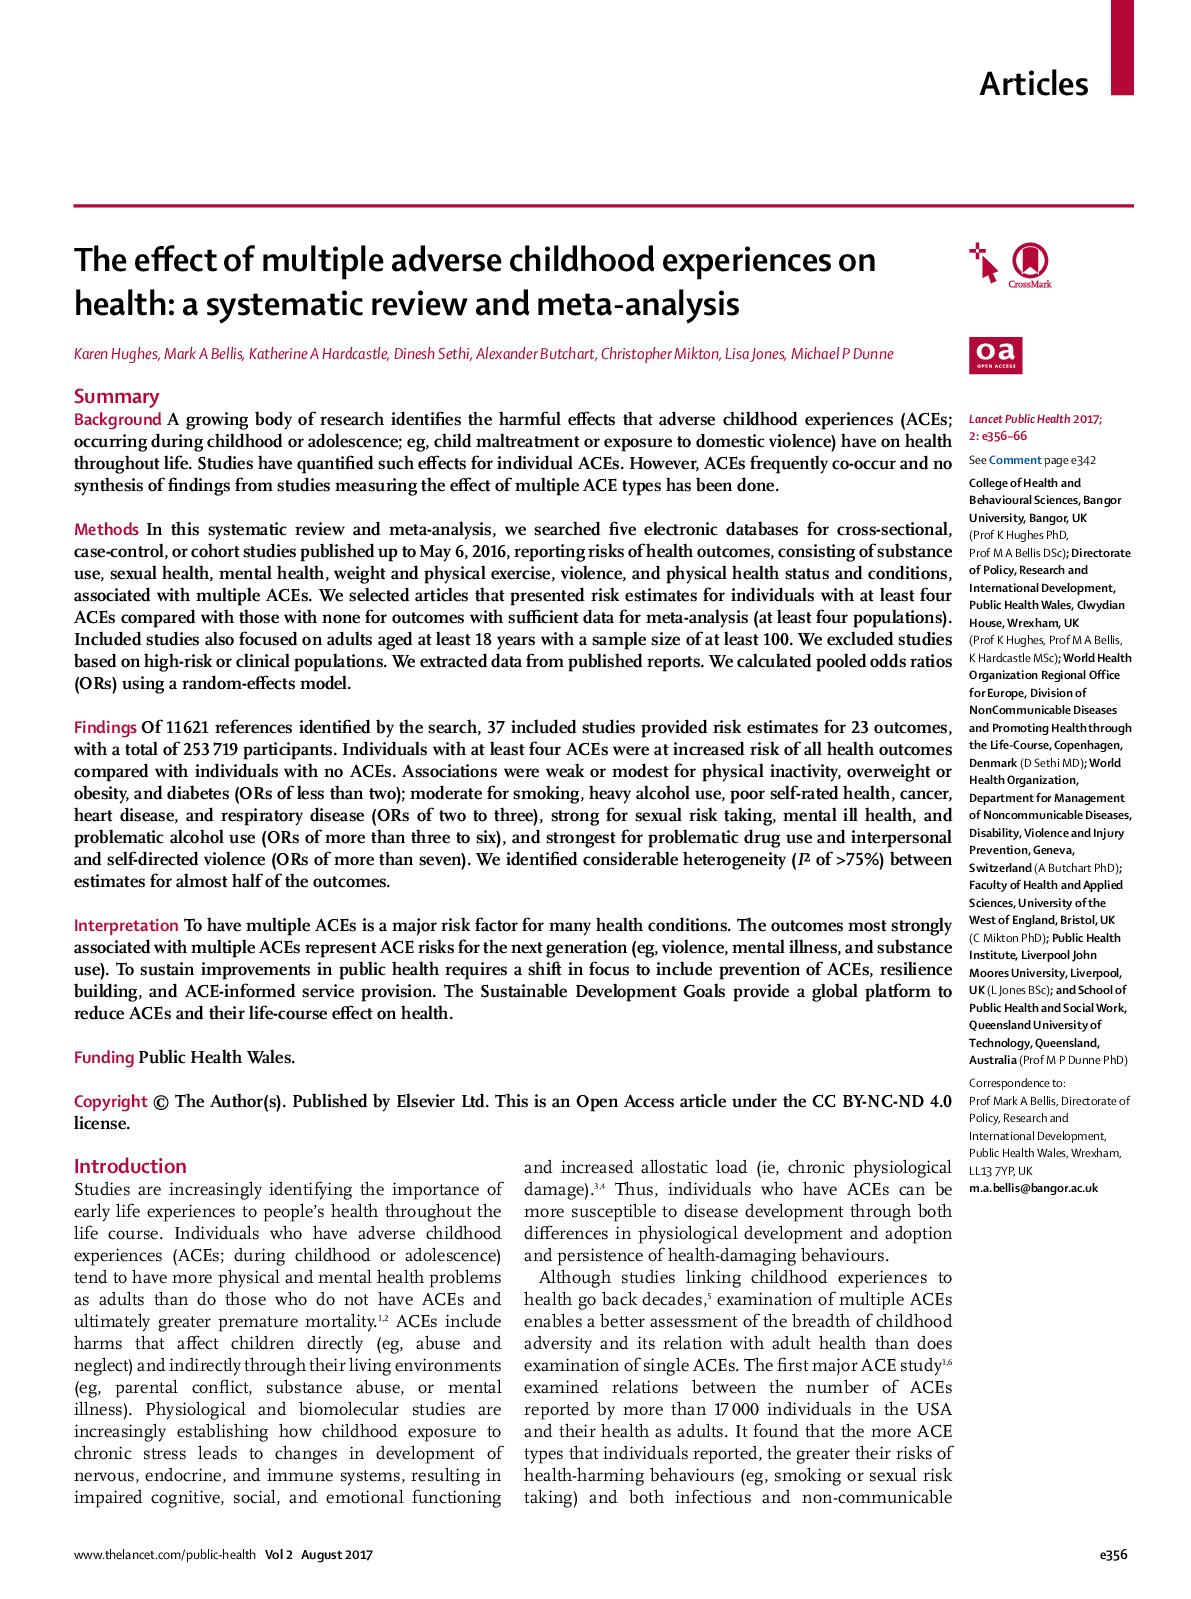 Lancet Public Health - The effect of multiple adverse childhood experiences on health